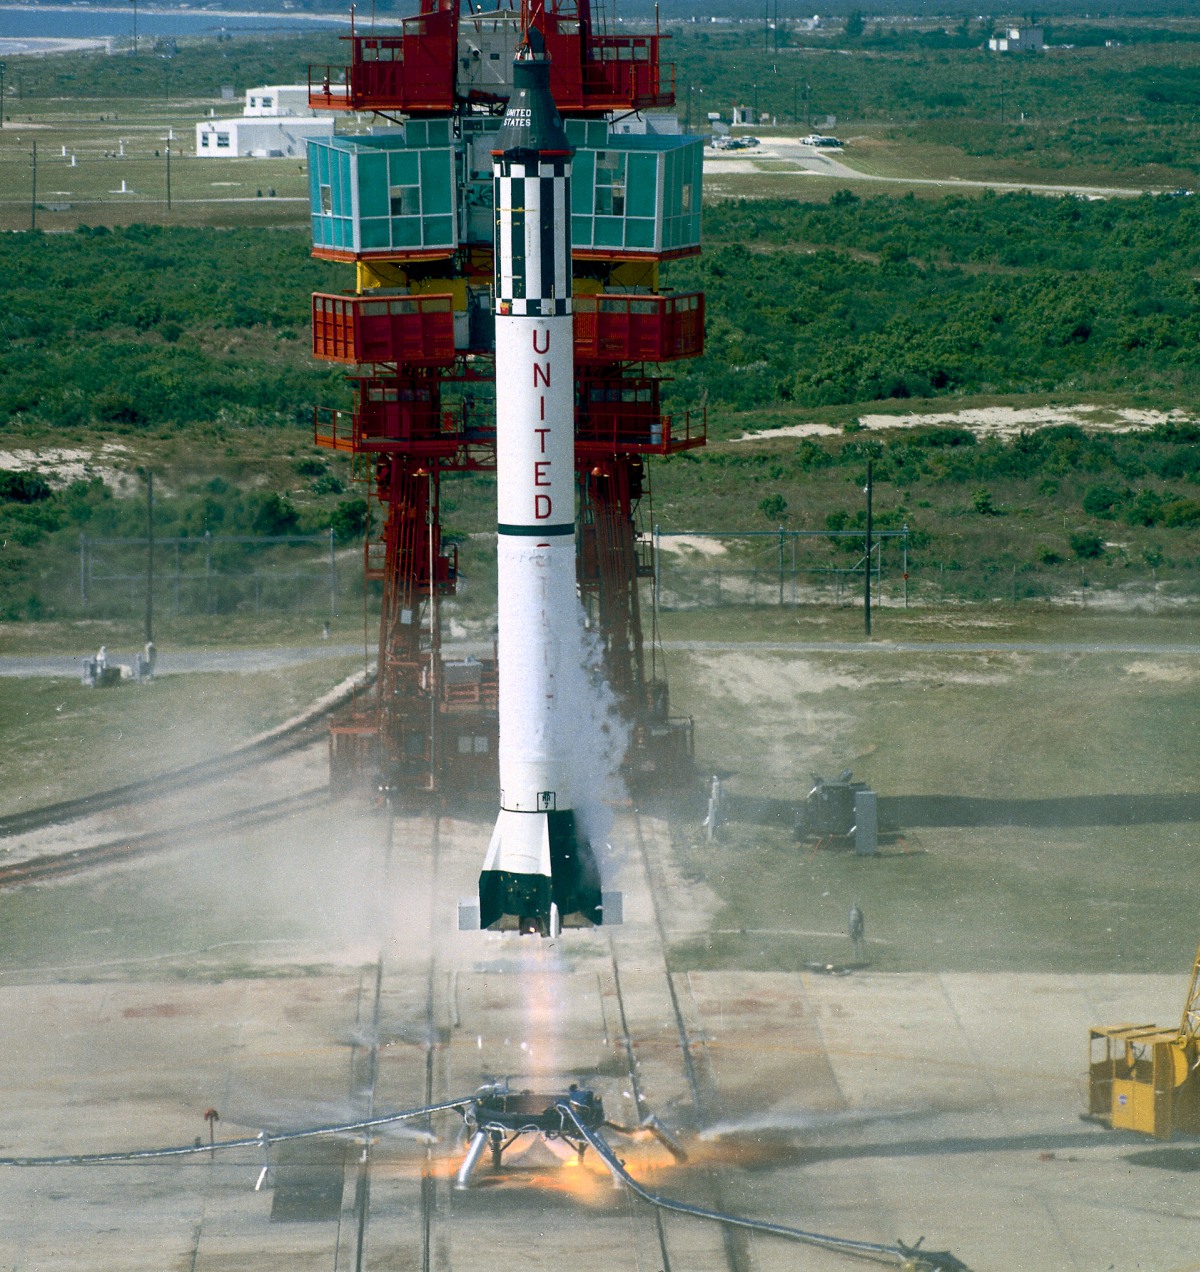 The launch of the Mercury-Redstone rocket carrying Alan Shepard into space on May 5, 1961.